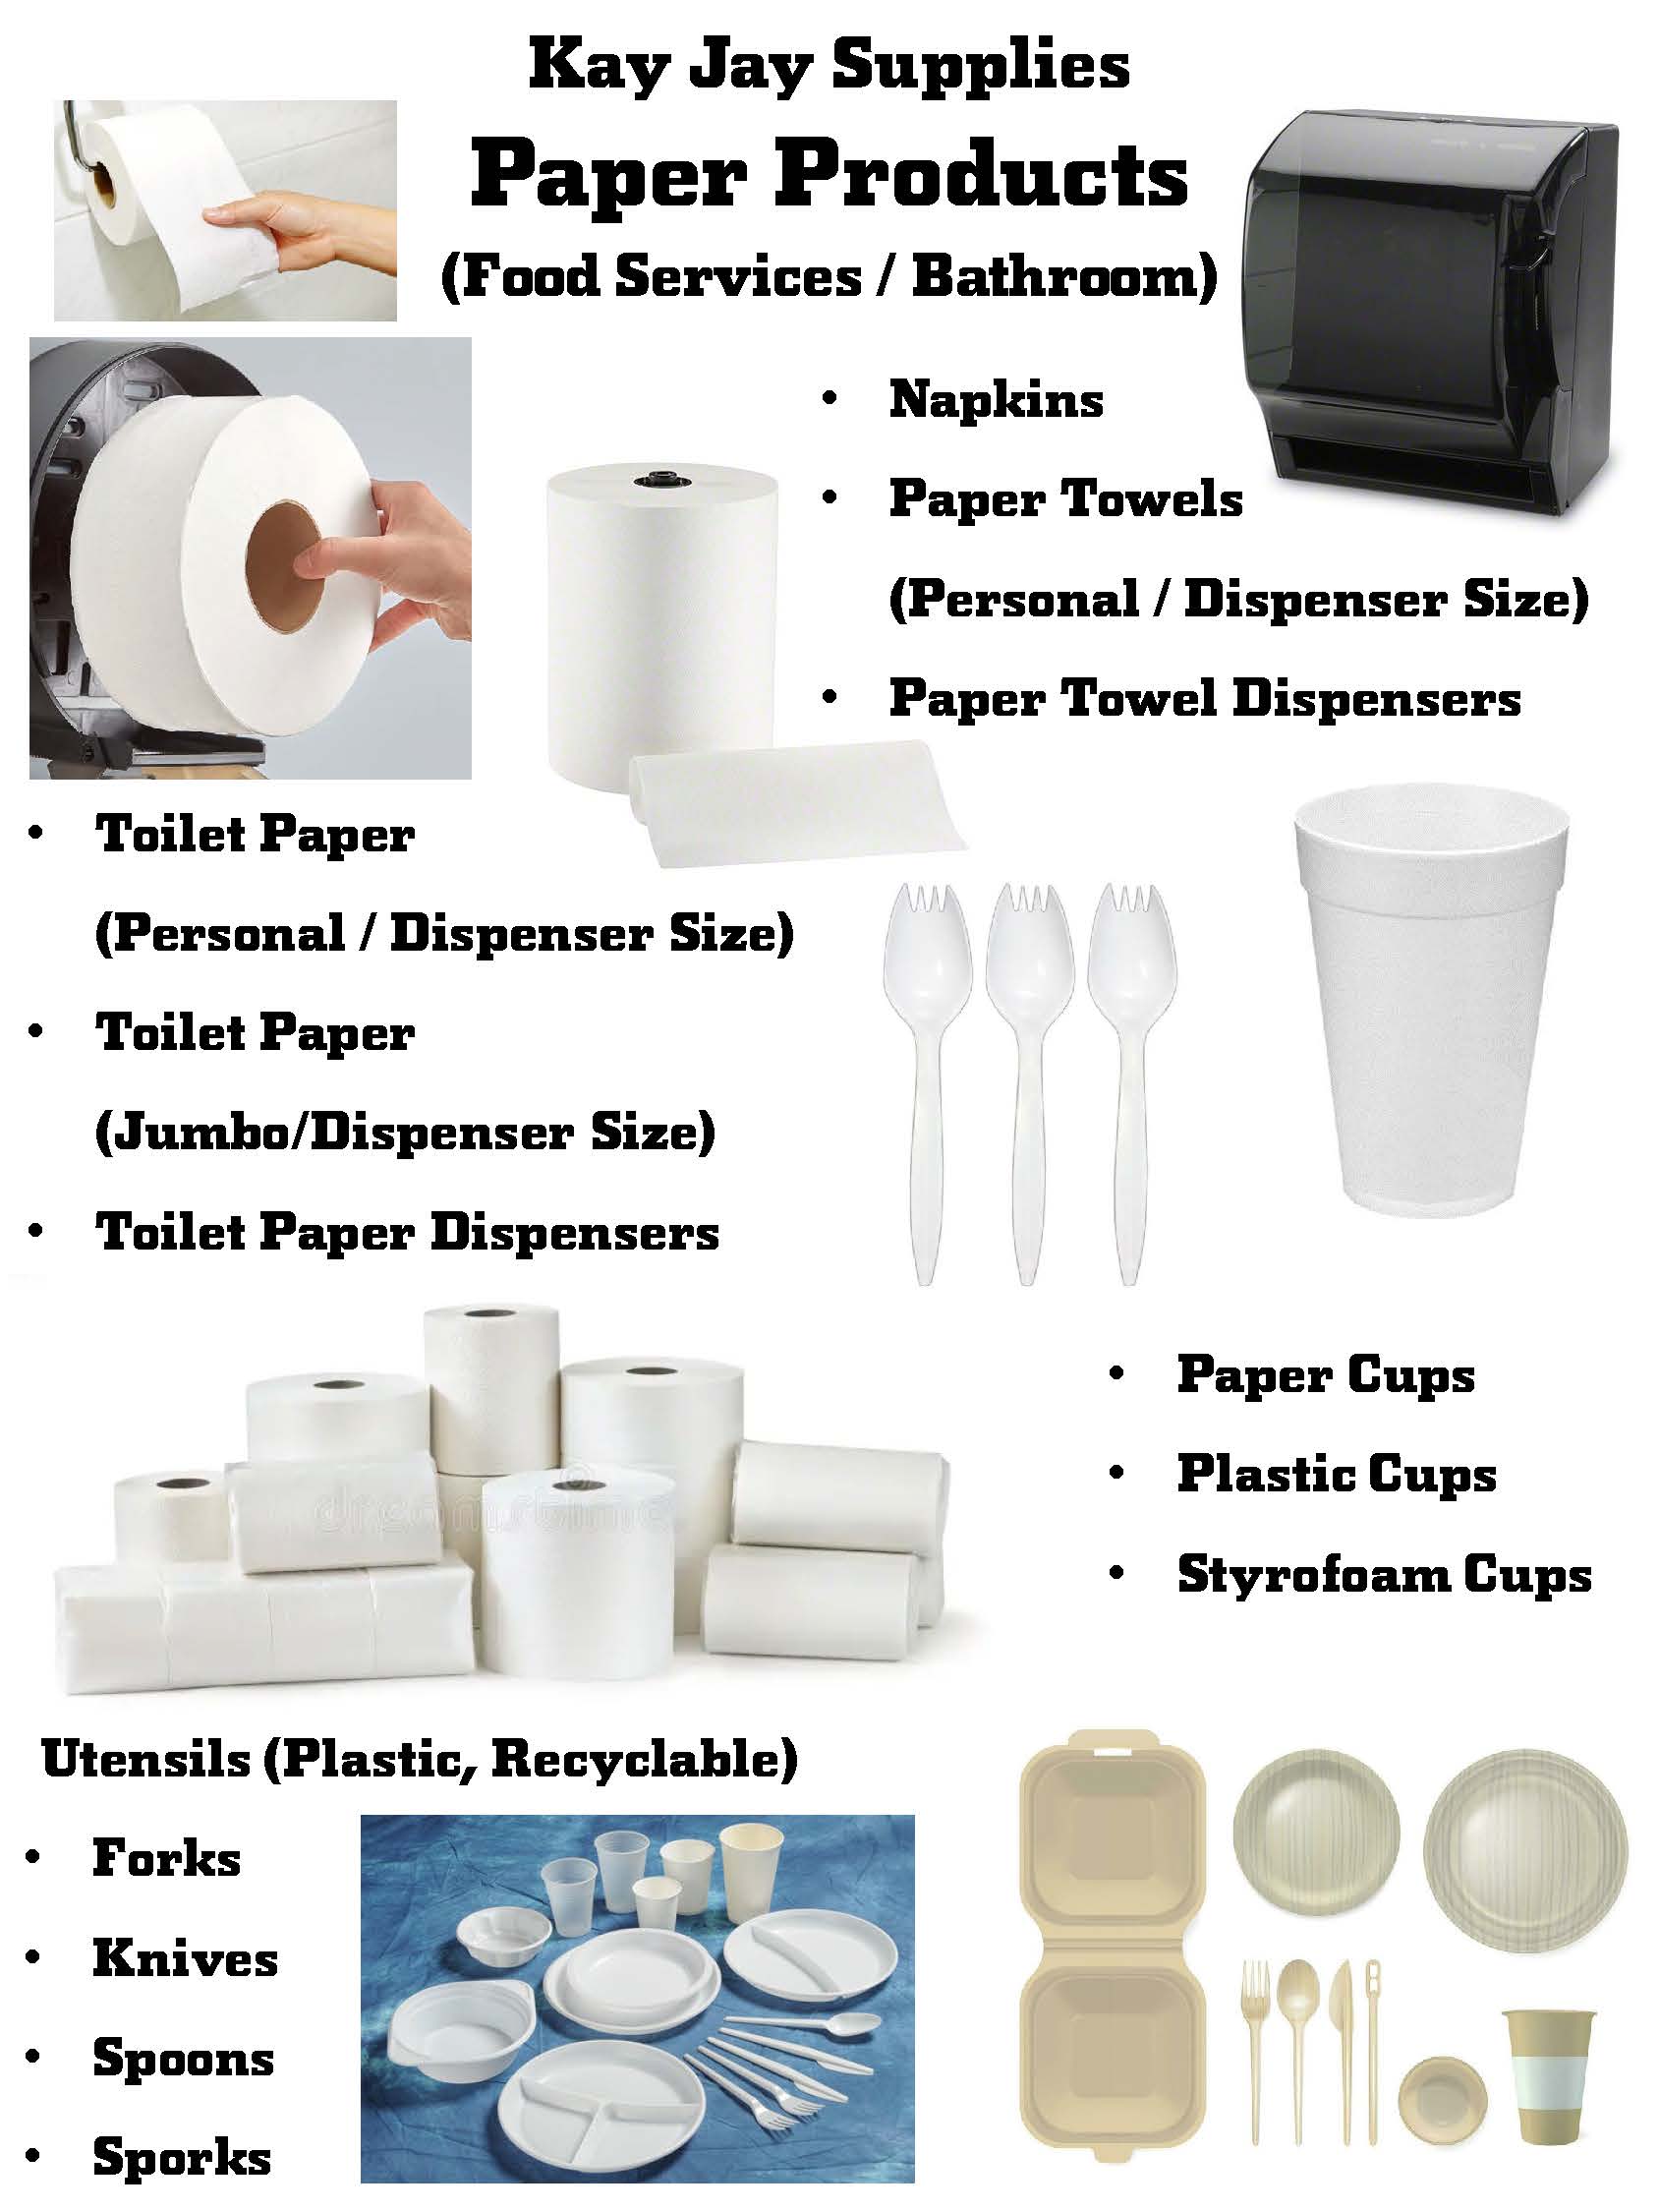 Paper Products, (Food Services / Bathroom), Napkins, Paper Towels (Personal / Dispenser Size), Paper Towel Dispensers, Toilet Paper (Personal / Dispenser Size), Toilet Paper (Jumbo/Dispenser Size), Toilet Paper Dispensers, Paper Cups, Plastic Cups, Styrofoam Cups, Utensils (Plastic, Recyclable), Forks, Knives, Spoons, Sporks